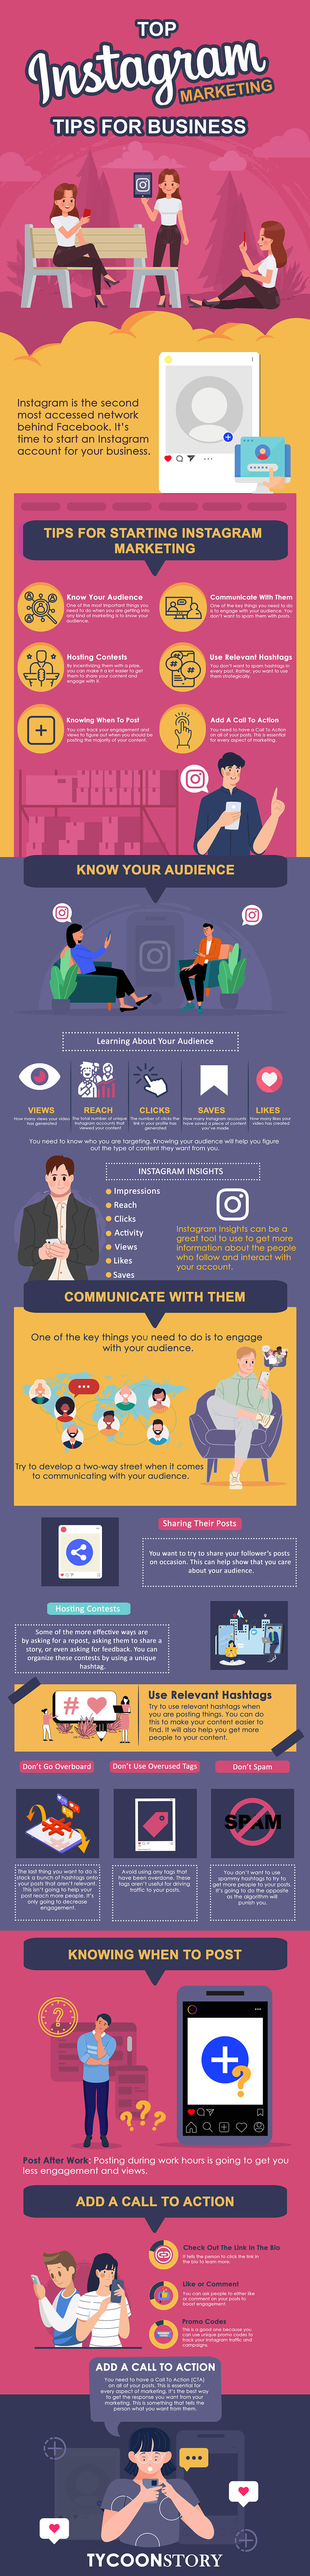 Top instagram marketing tips for businesses infographic  instagram business